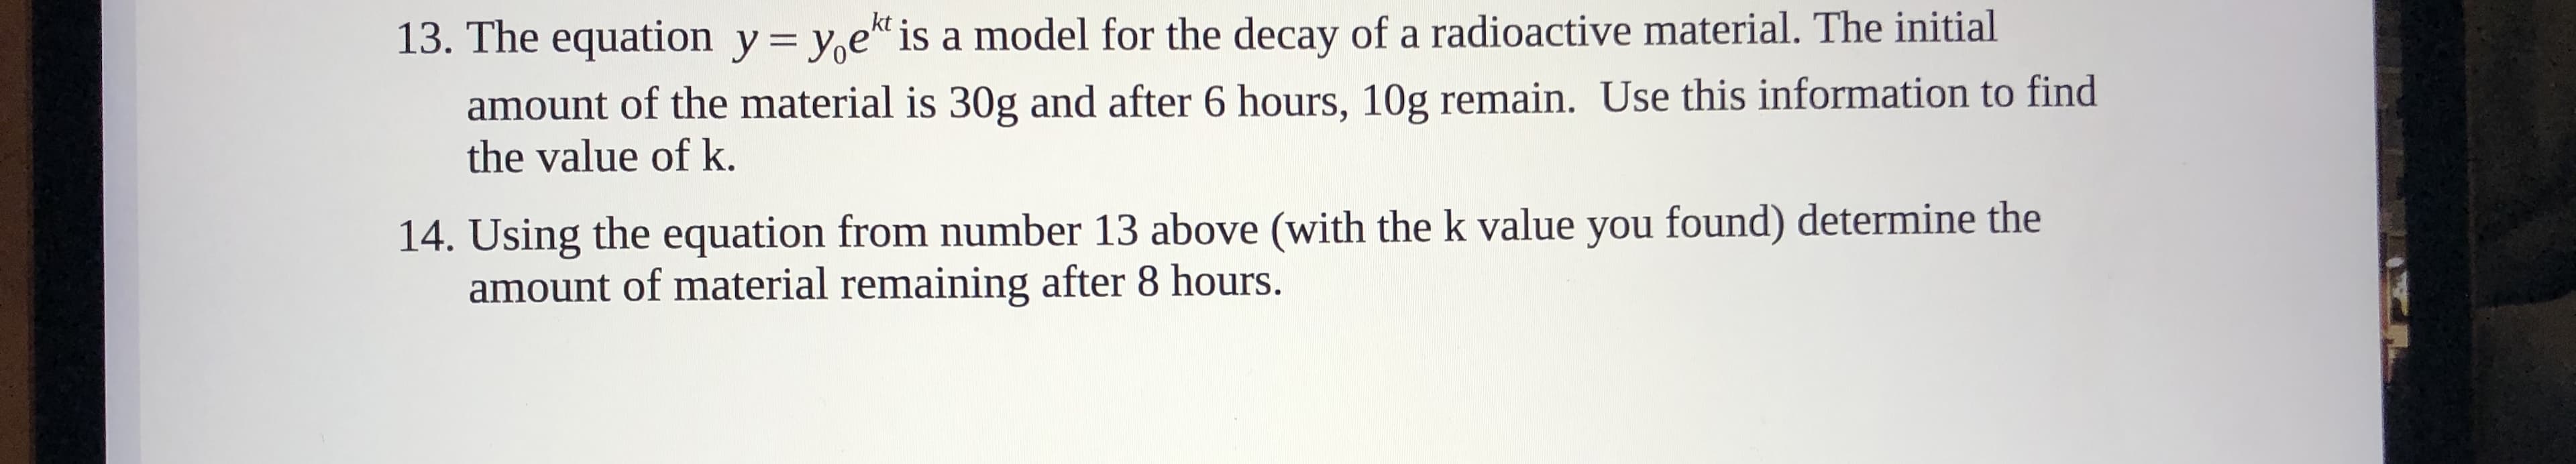 13. The equation y= y,e is a model for the decay of a radioactive material. The initial
amount of the material is 30g and after 6 hours, 10g remain. Use this information to find
the value of k.
14. Using the equation from number 13 above (with the k value you found) determine the
amount of material remaining after 8 hours.
